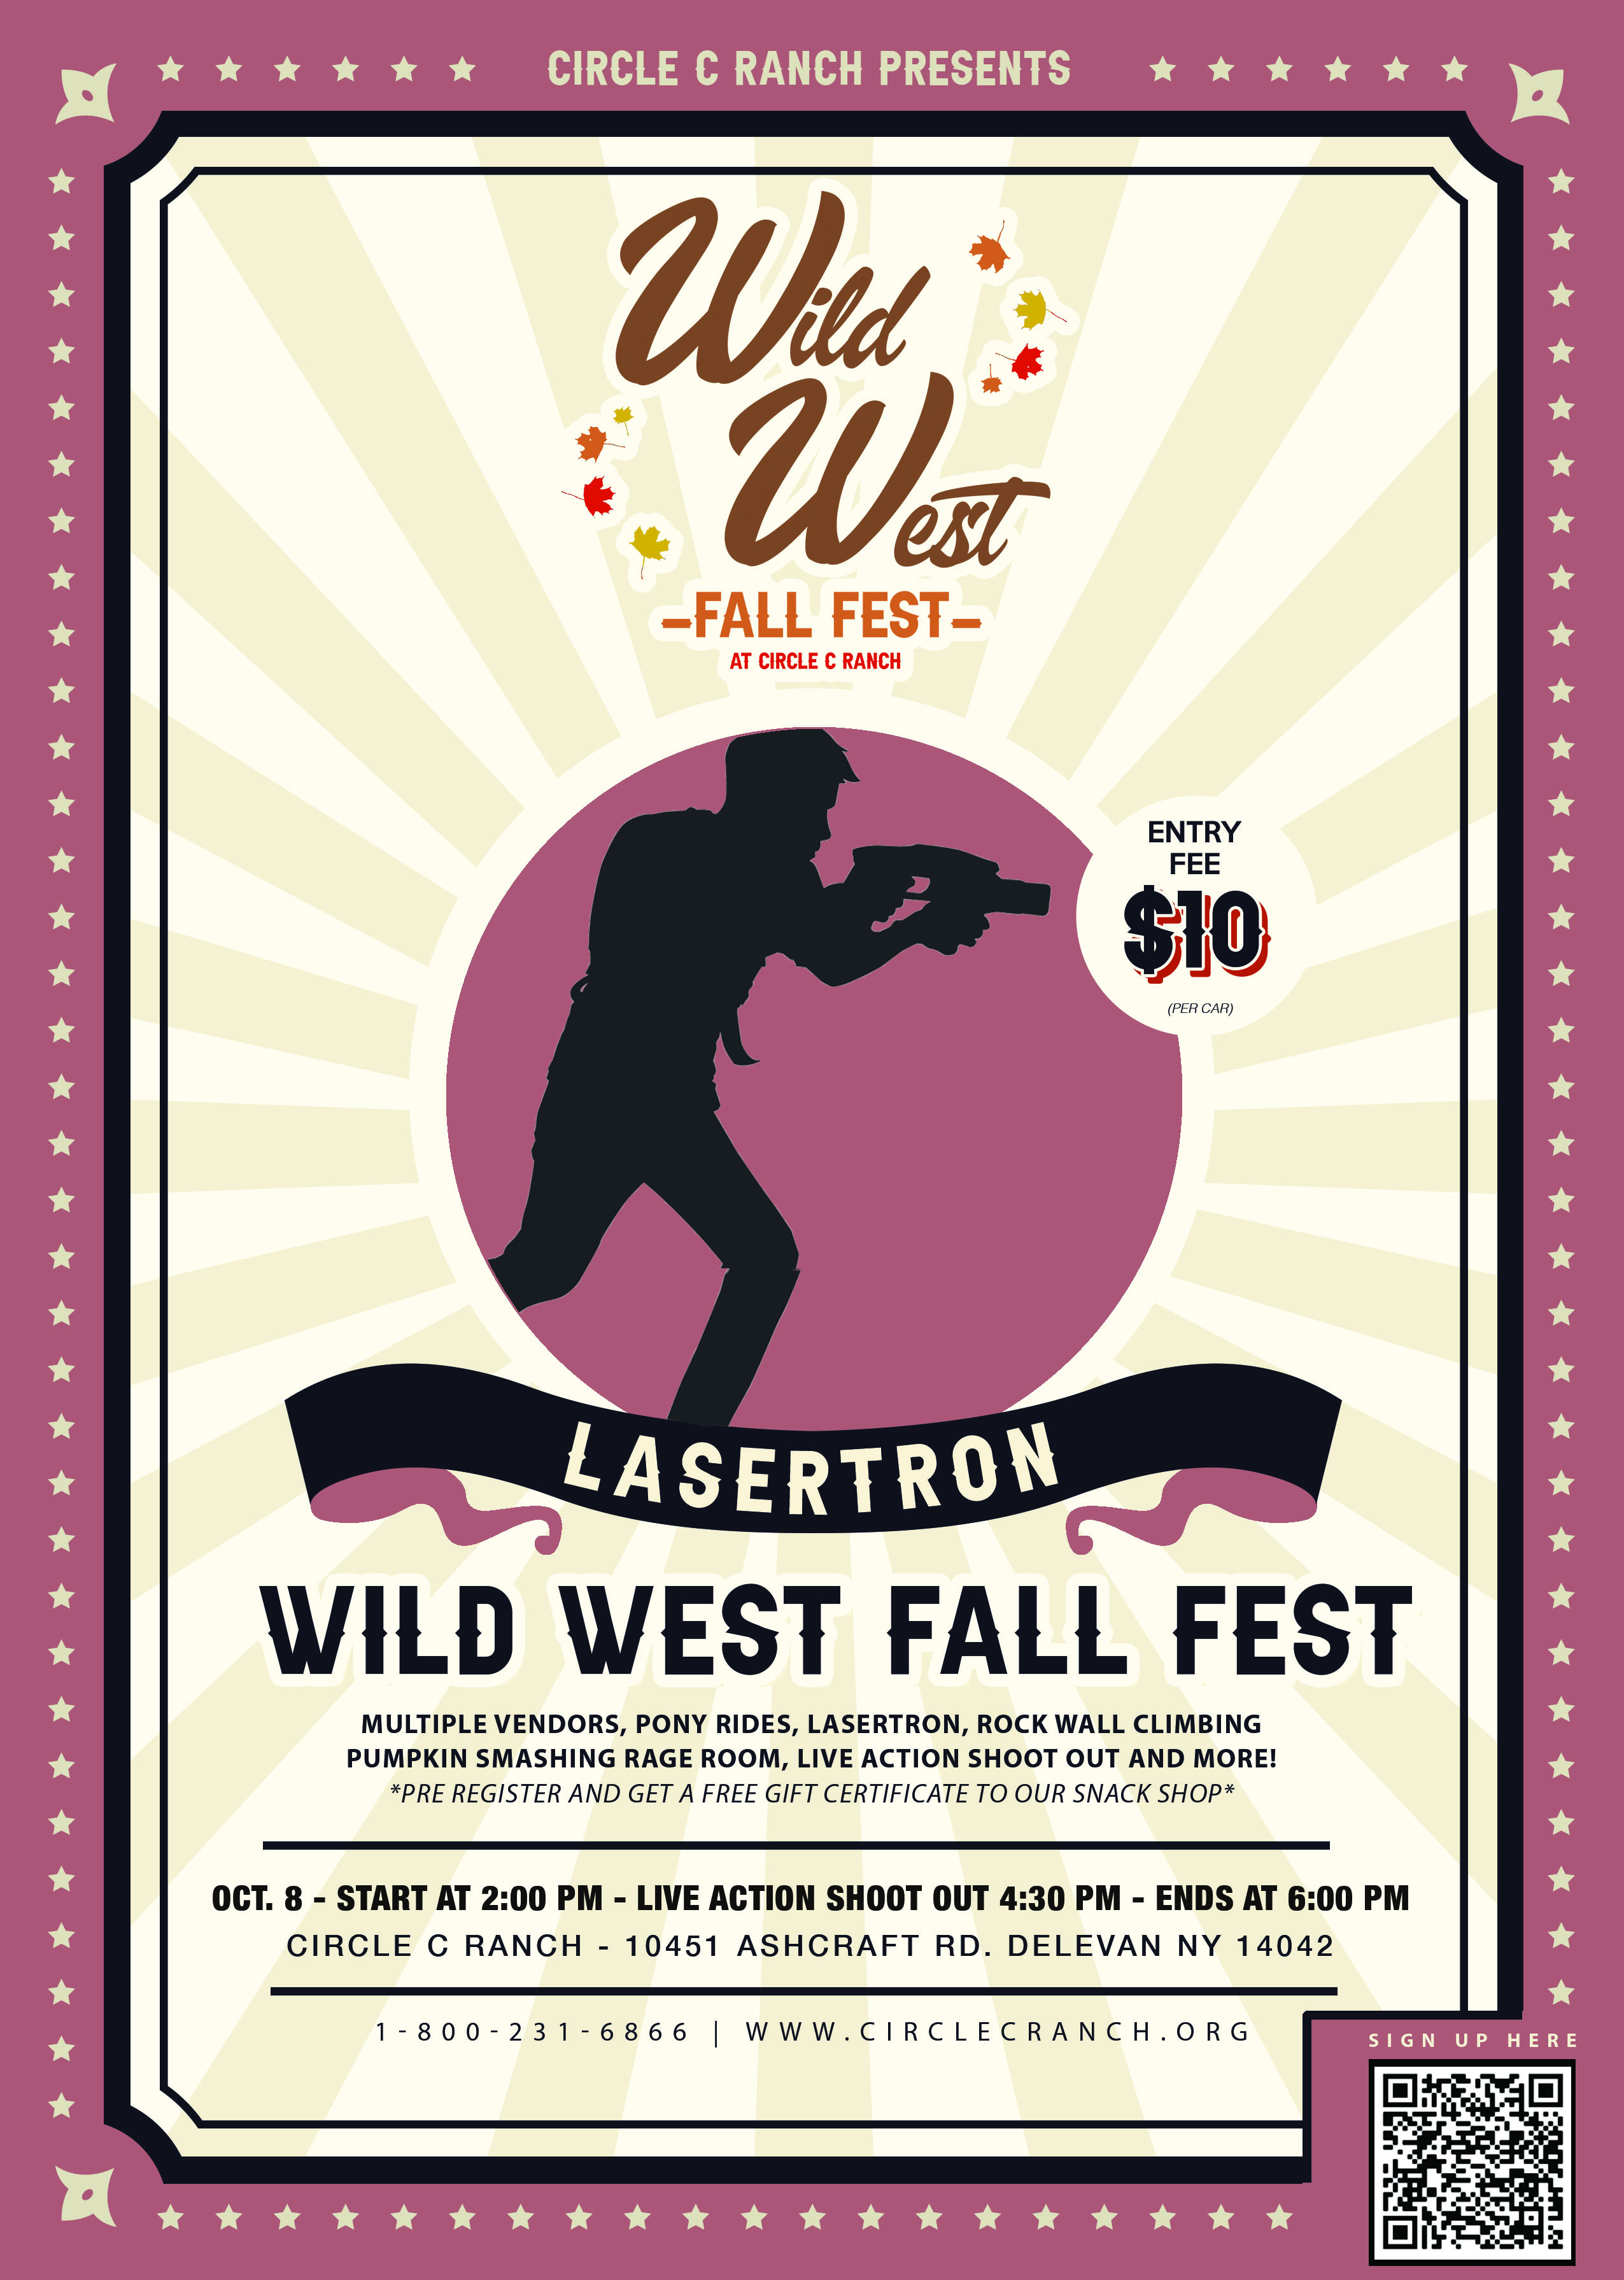 Flyers for Wild West Fall Fest 22Lasertron